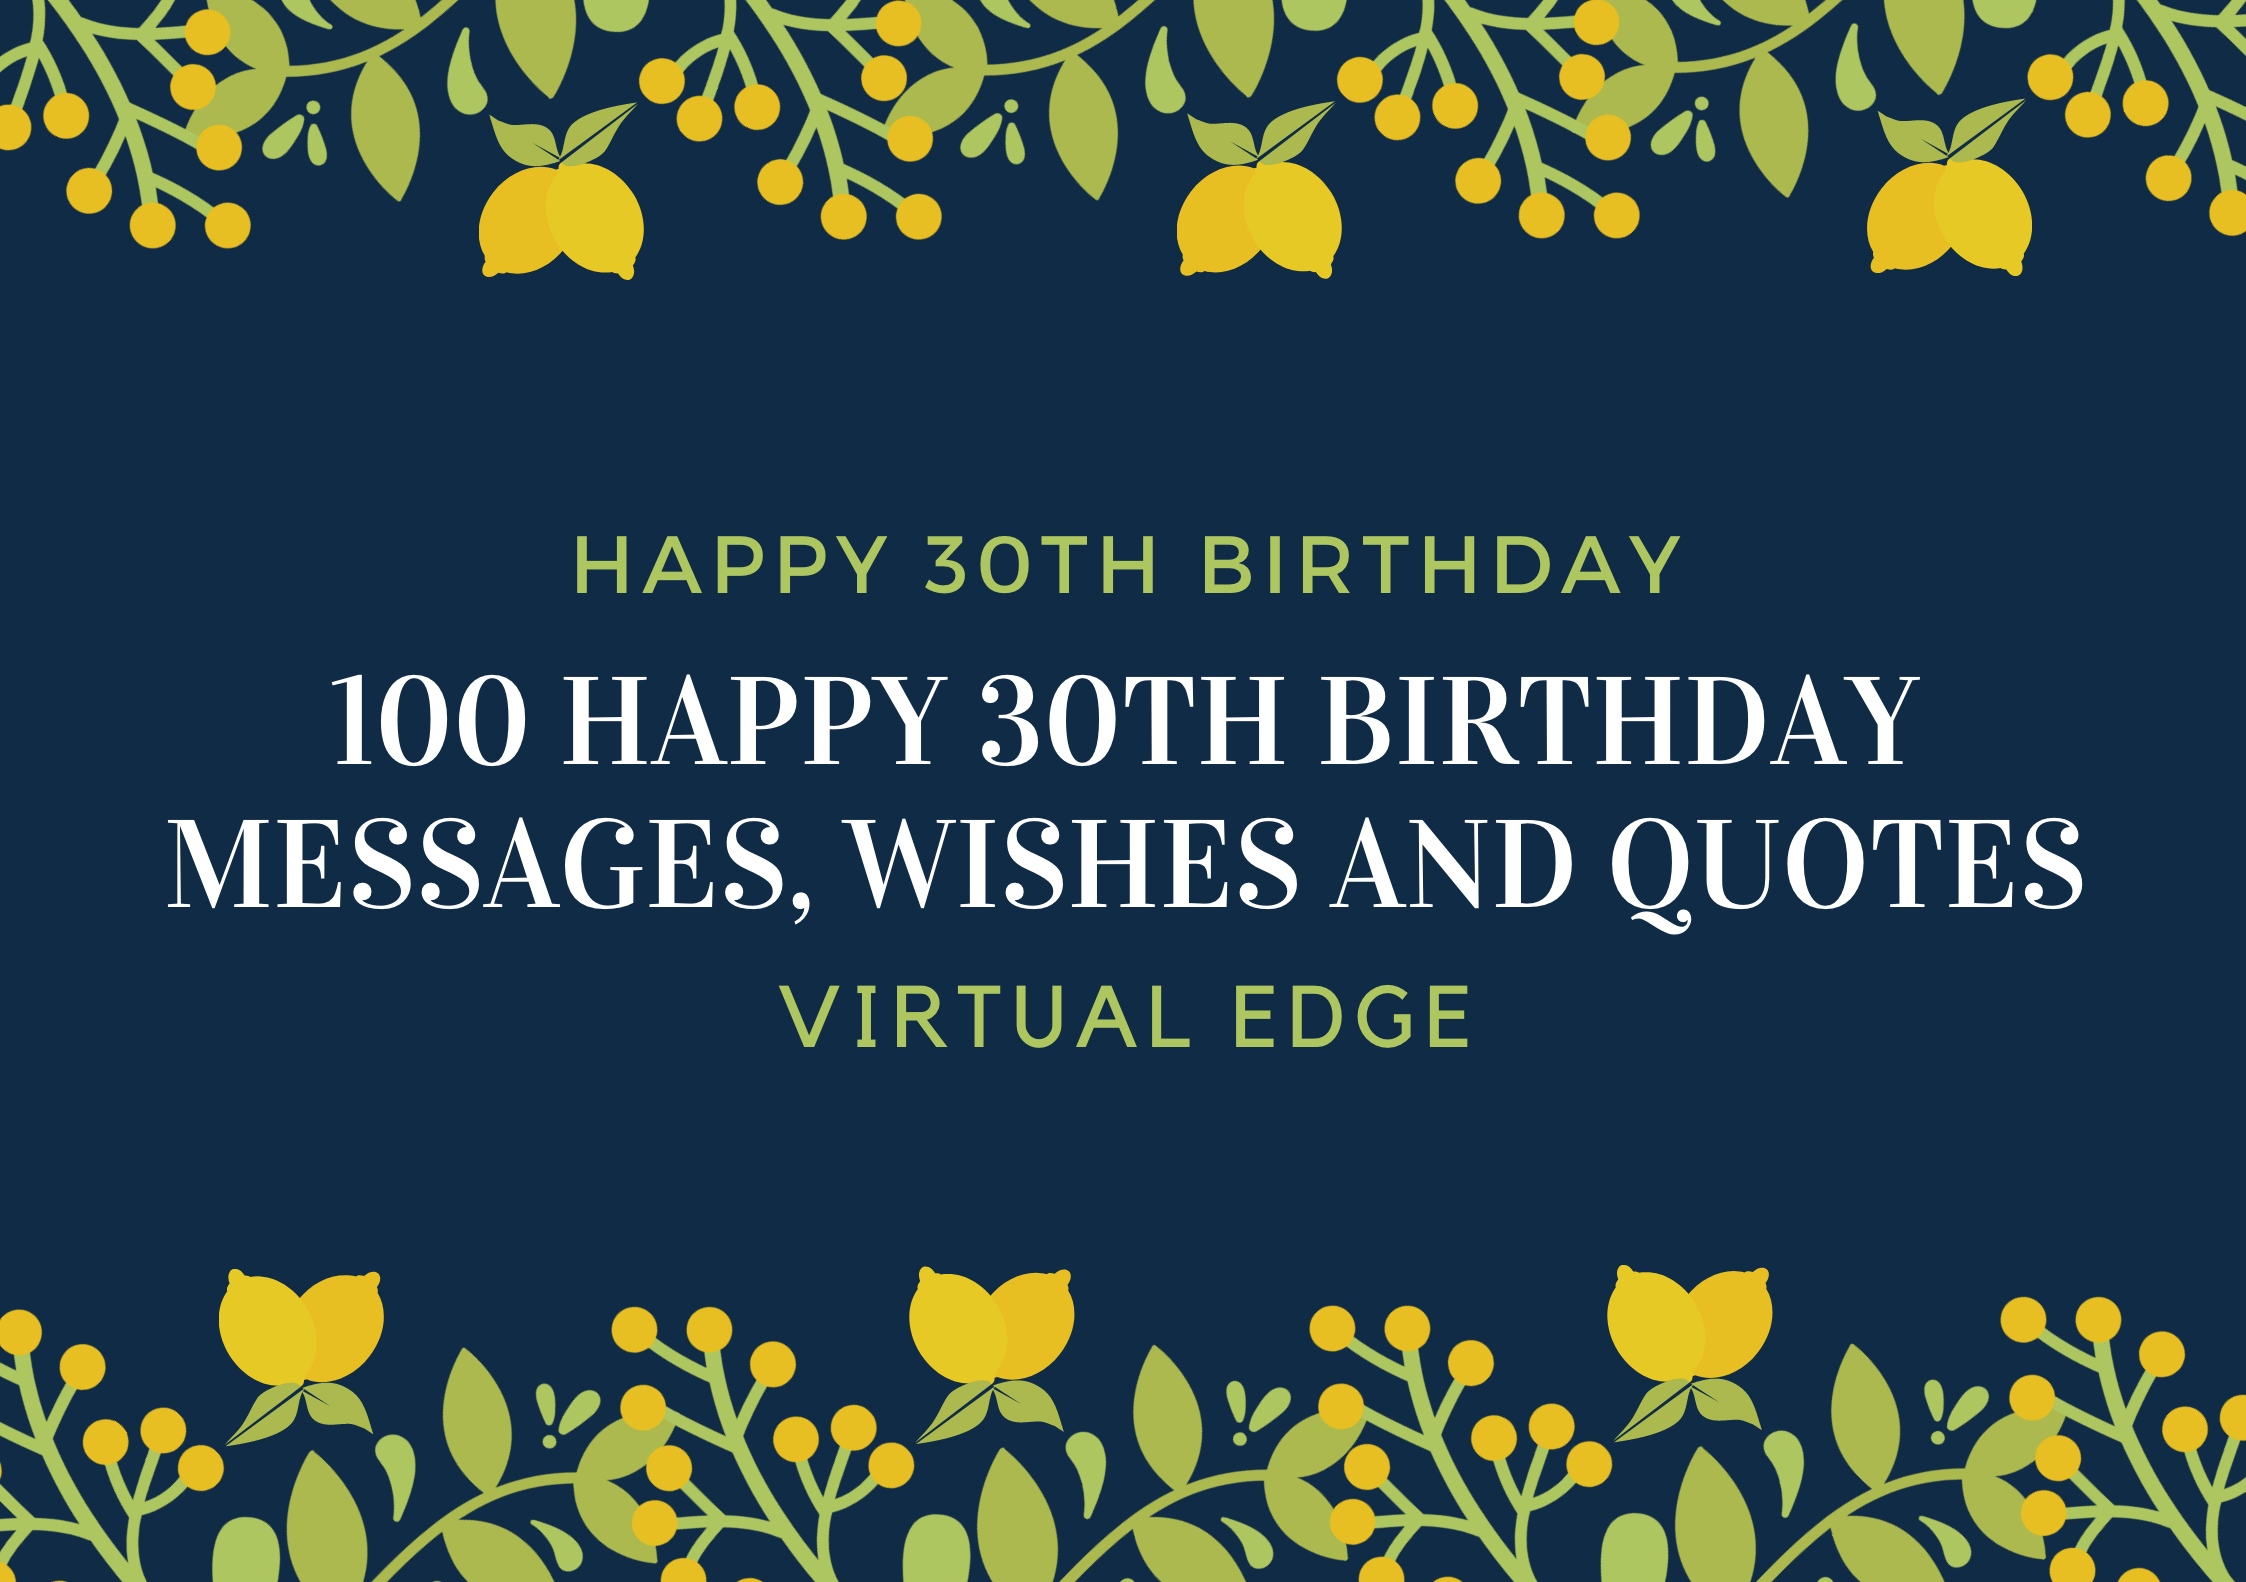 100 Happy 30th Birthday Messages, Wishes and Quotes